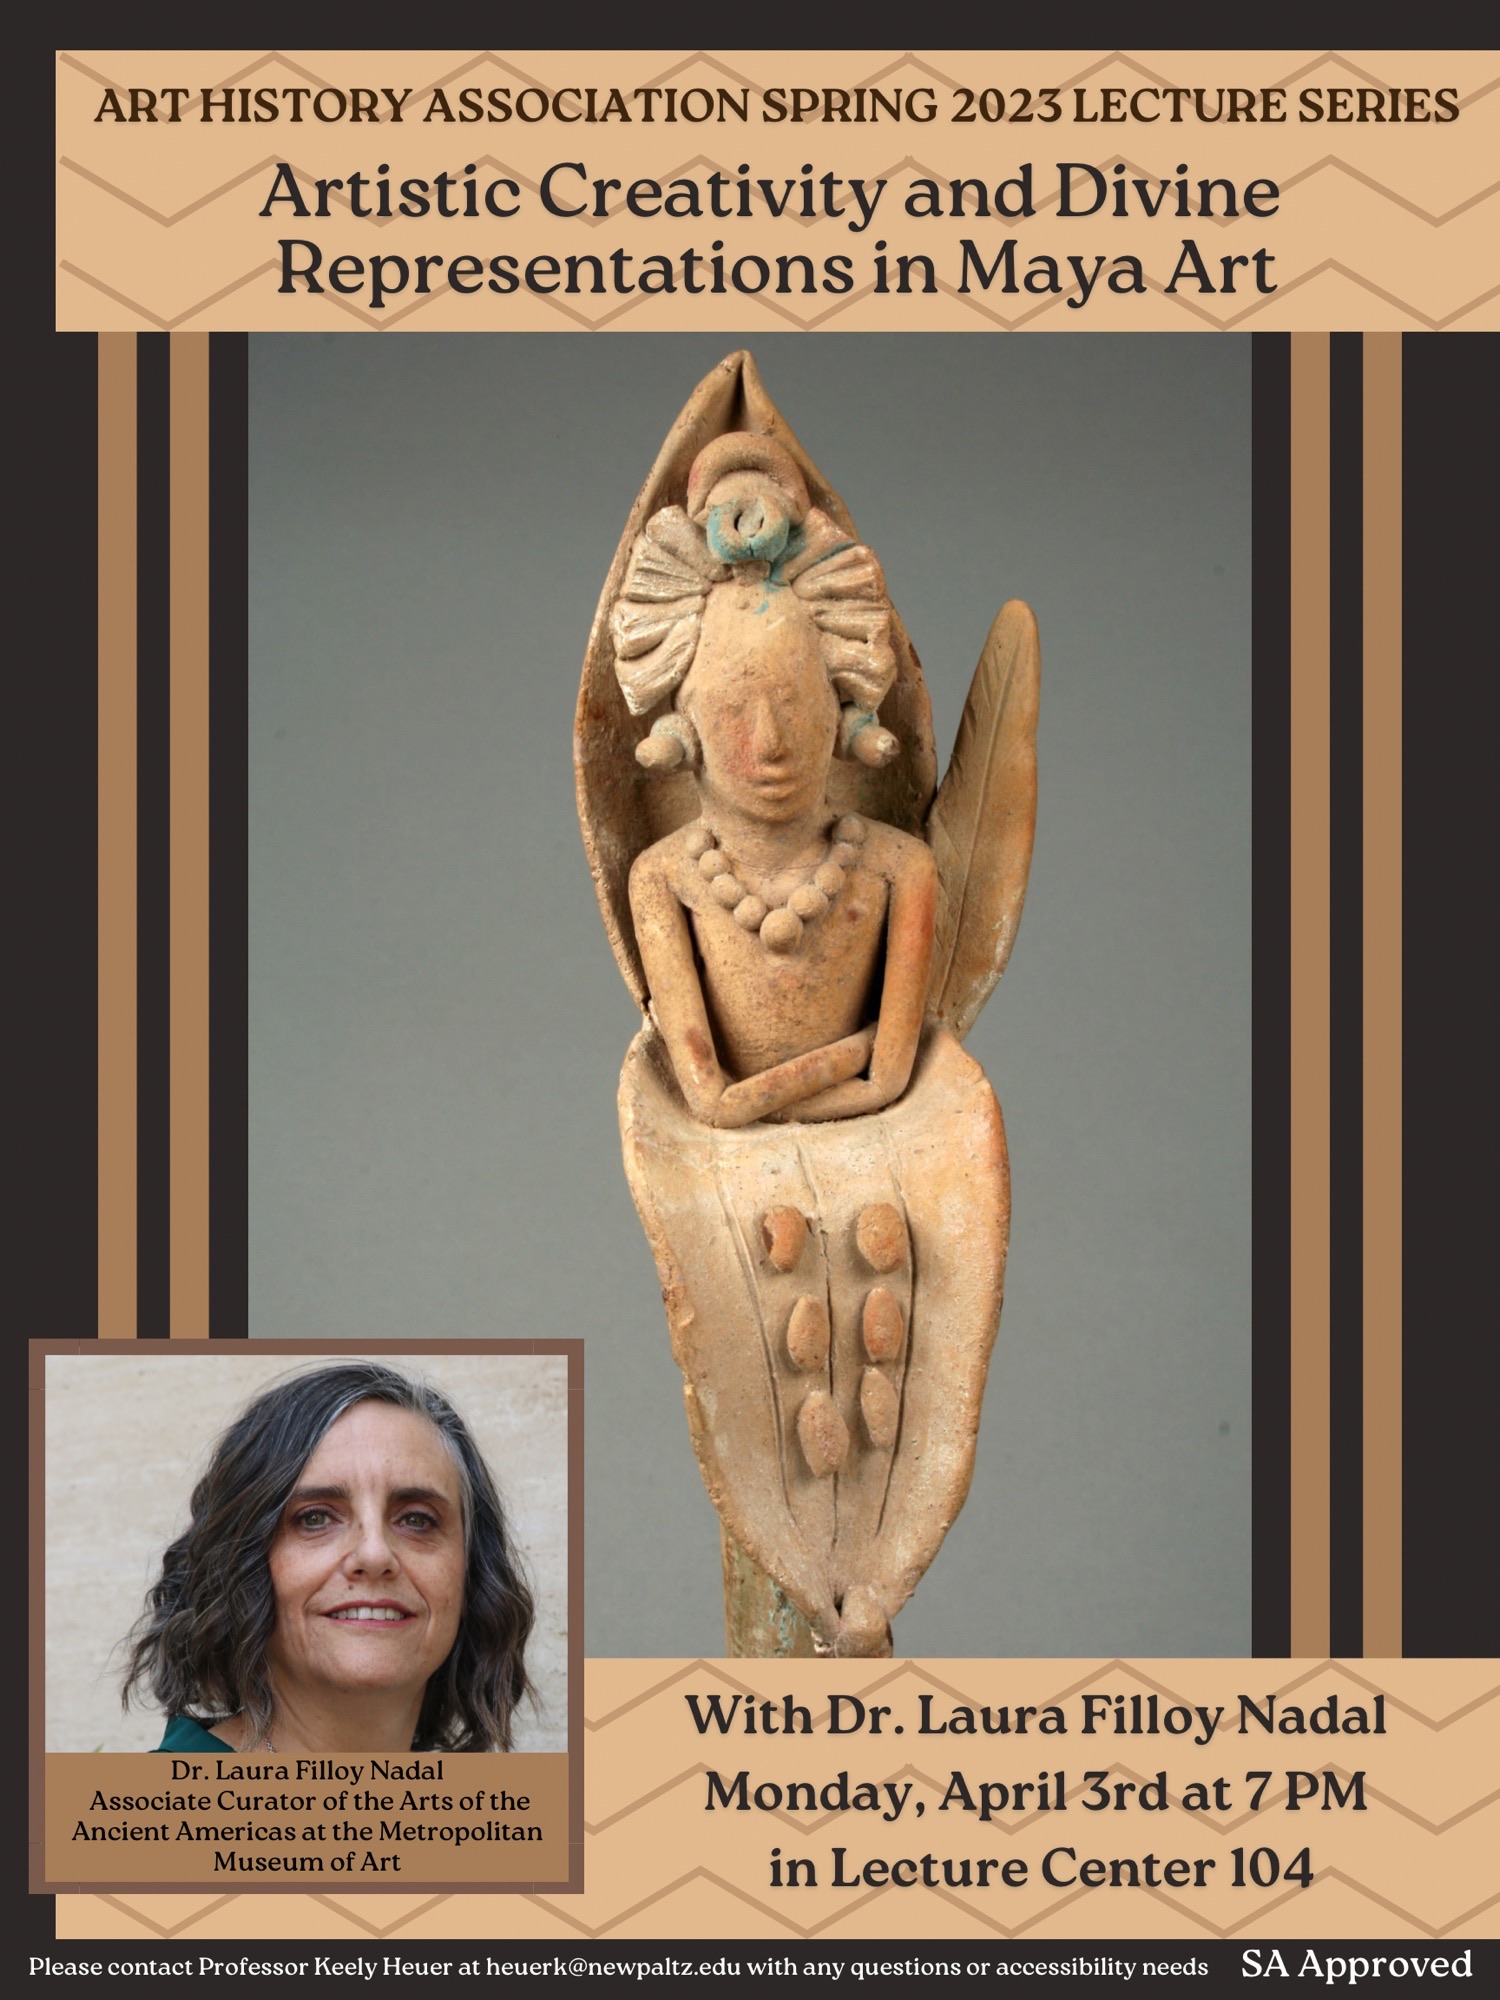 Flyer for Dr. Laura Filloy Nadal talk with Maya figurine depicted